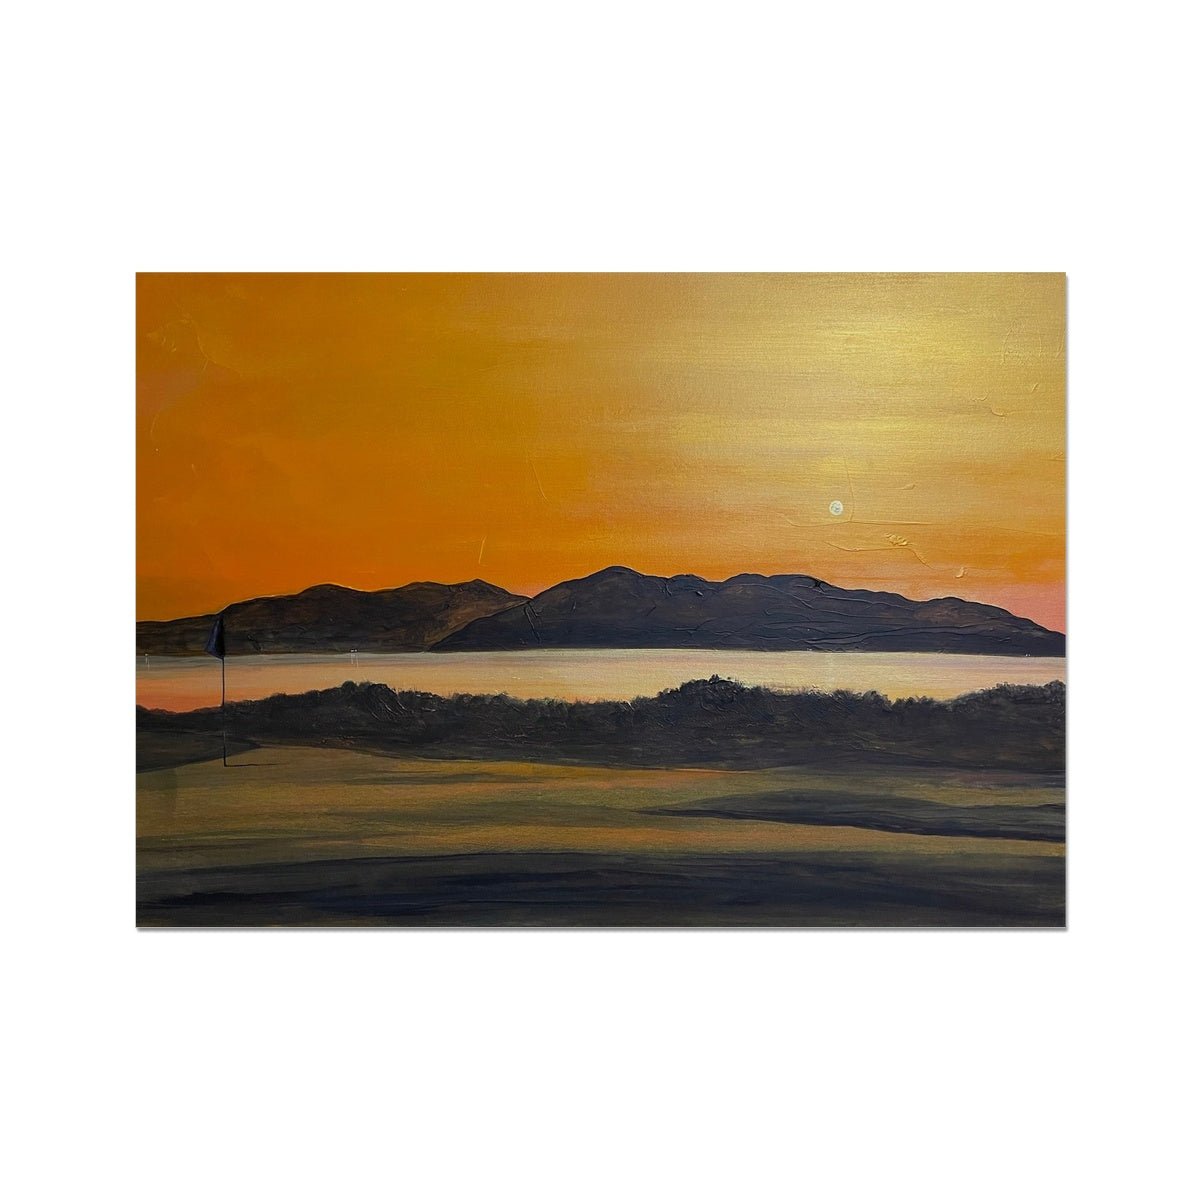 Arran & The 5th Green Royal Troon Golf Course Painting | Fine Art Prints From Scotland-Unframed Prints-Arran Art Gallery-A2 Landscape-Paintings, Prints, Homeware, Art Gifts From Scotland By Scottish Artist Kevin Hunter